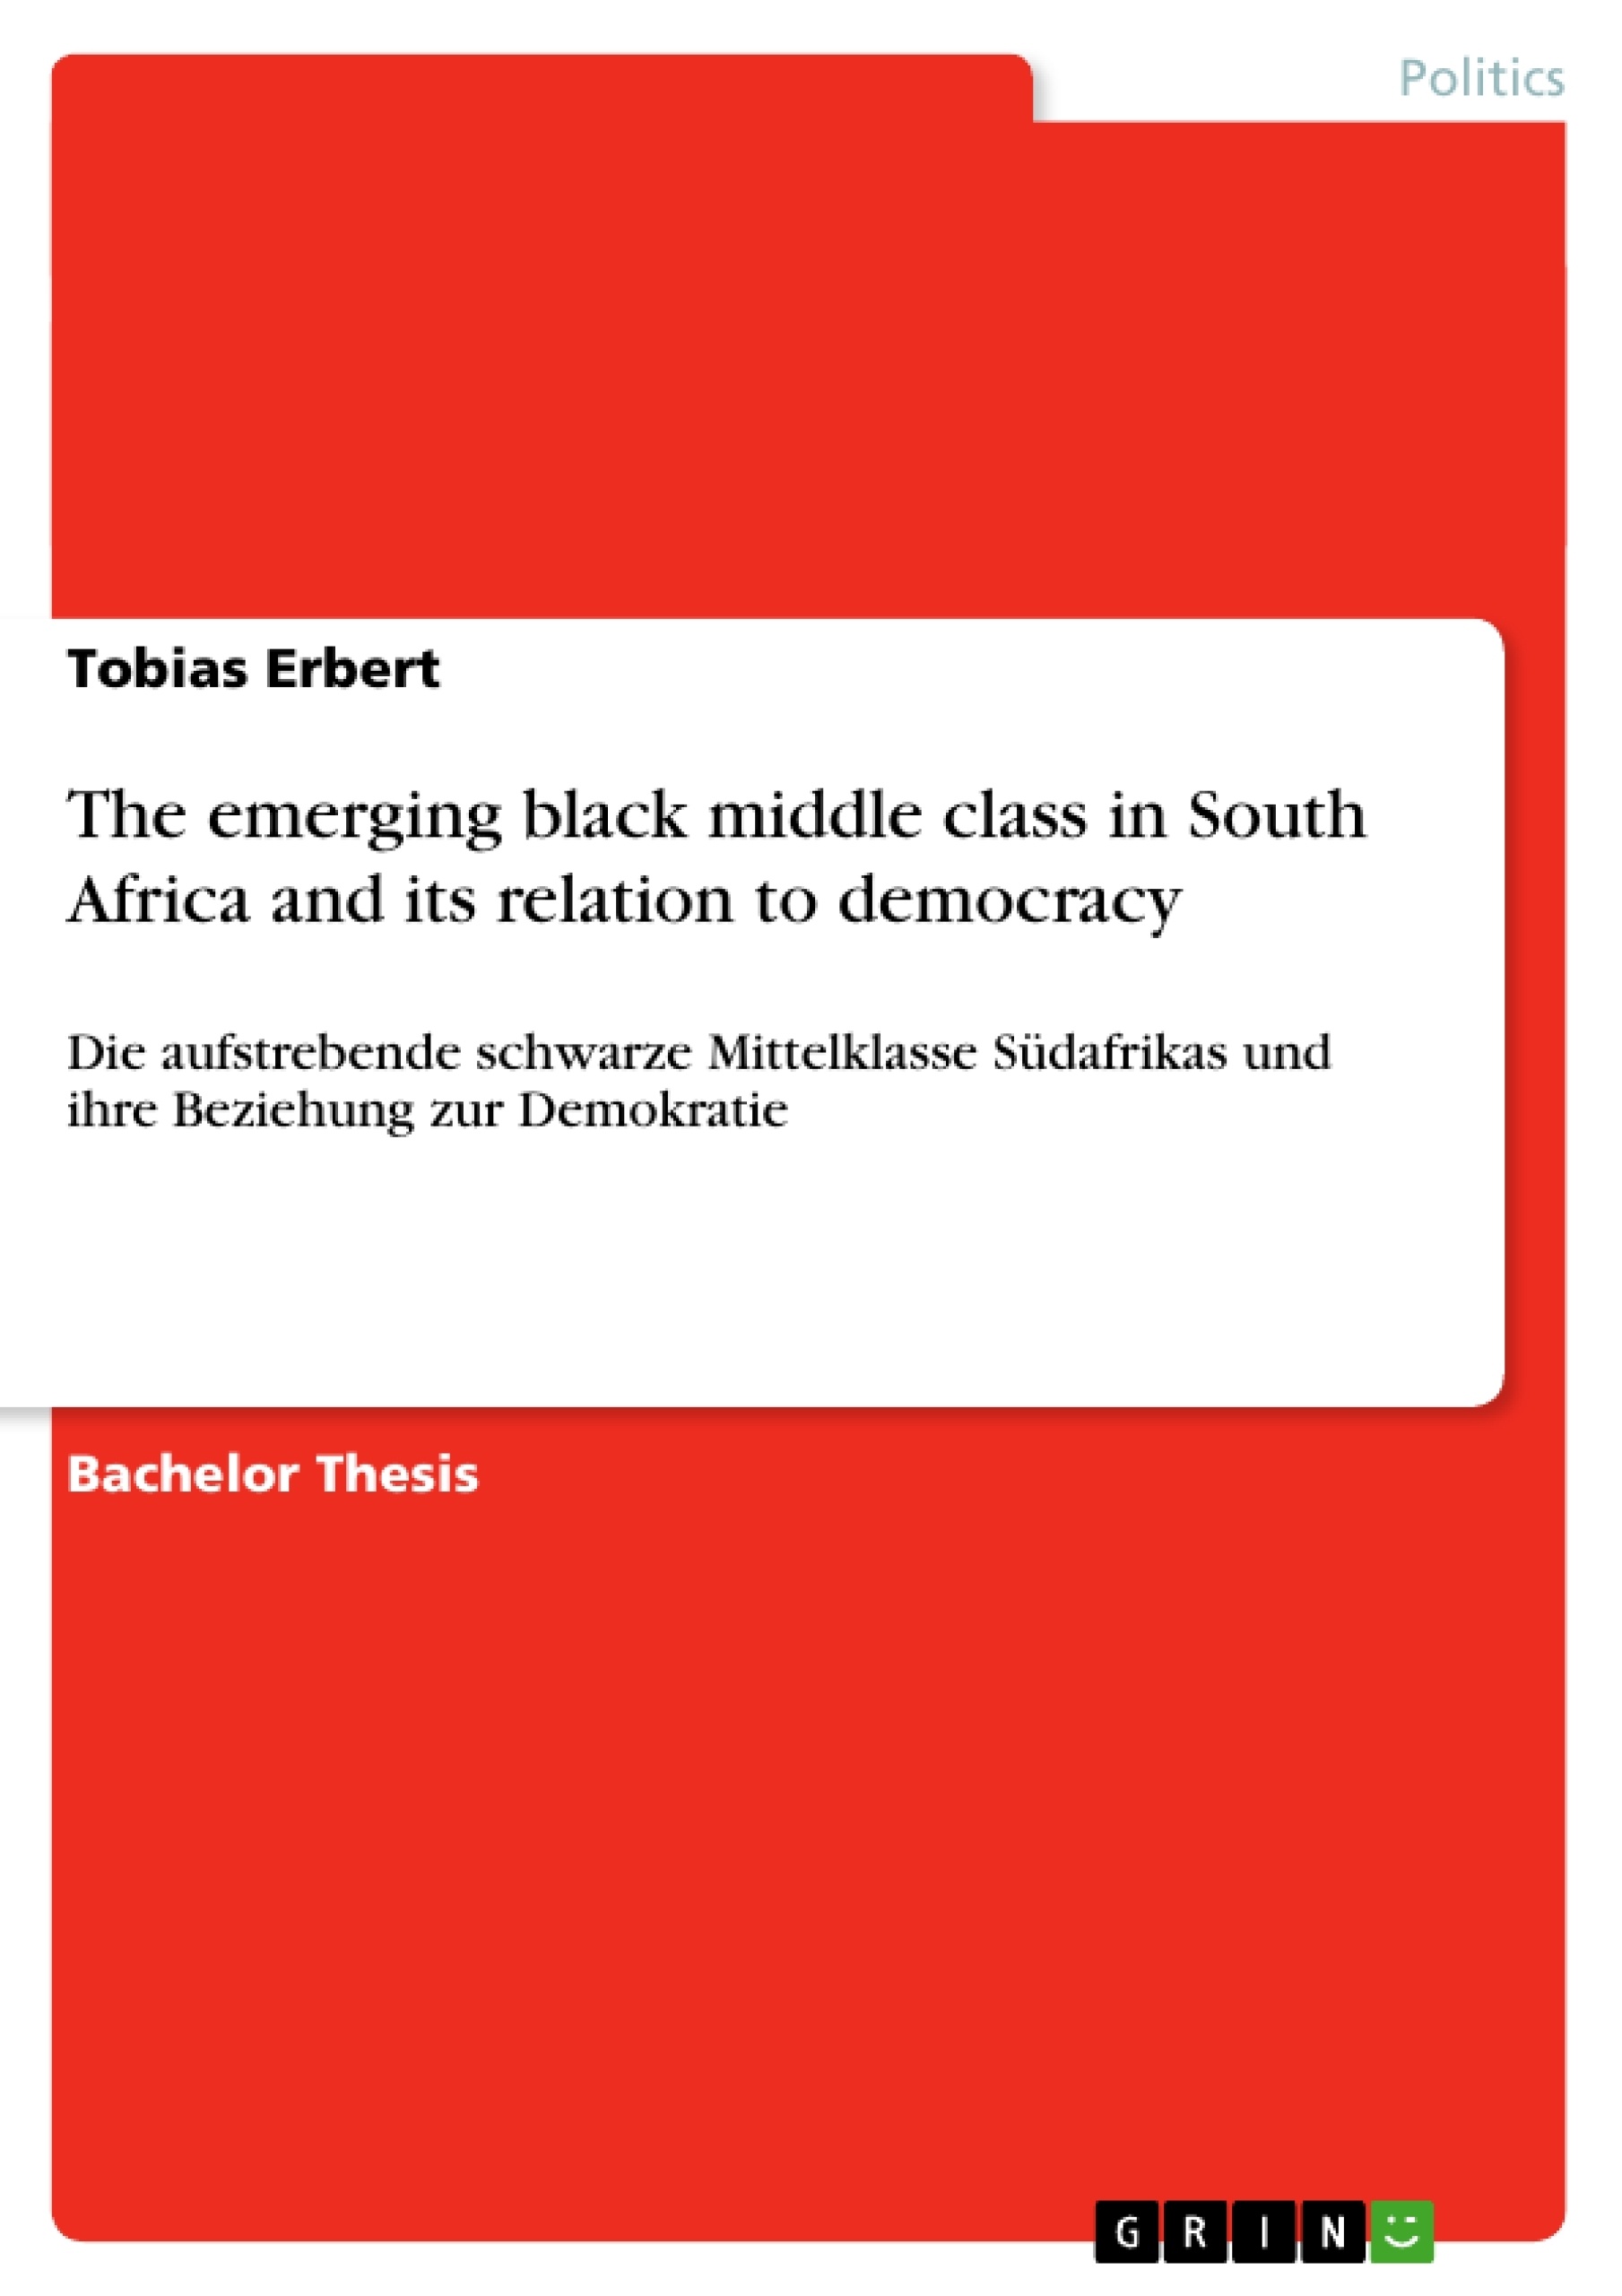 Título: The emerging black middle class in South Africa and its relation to democracy